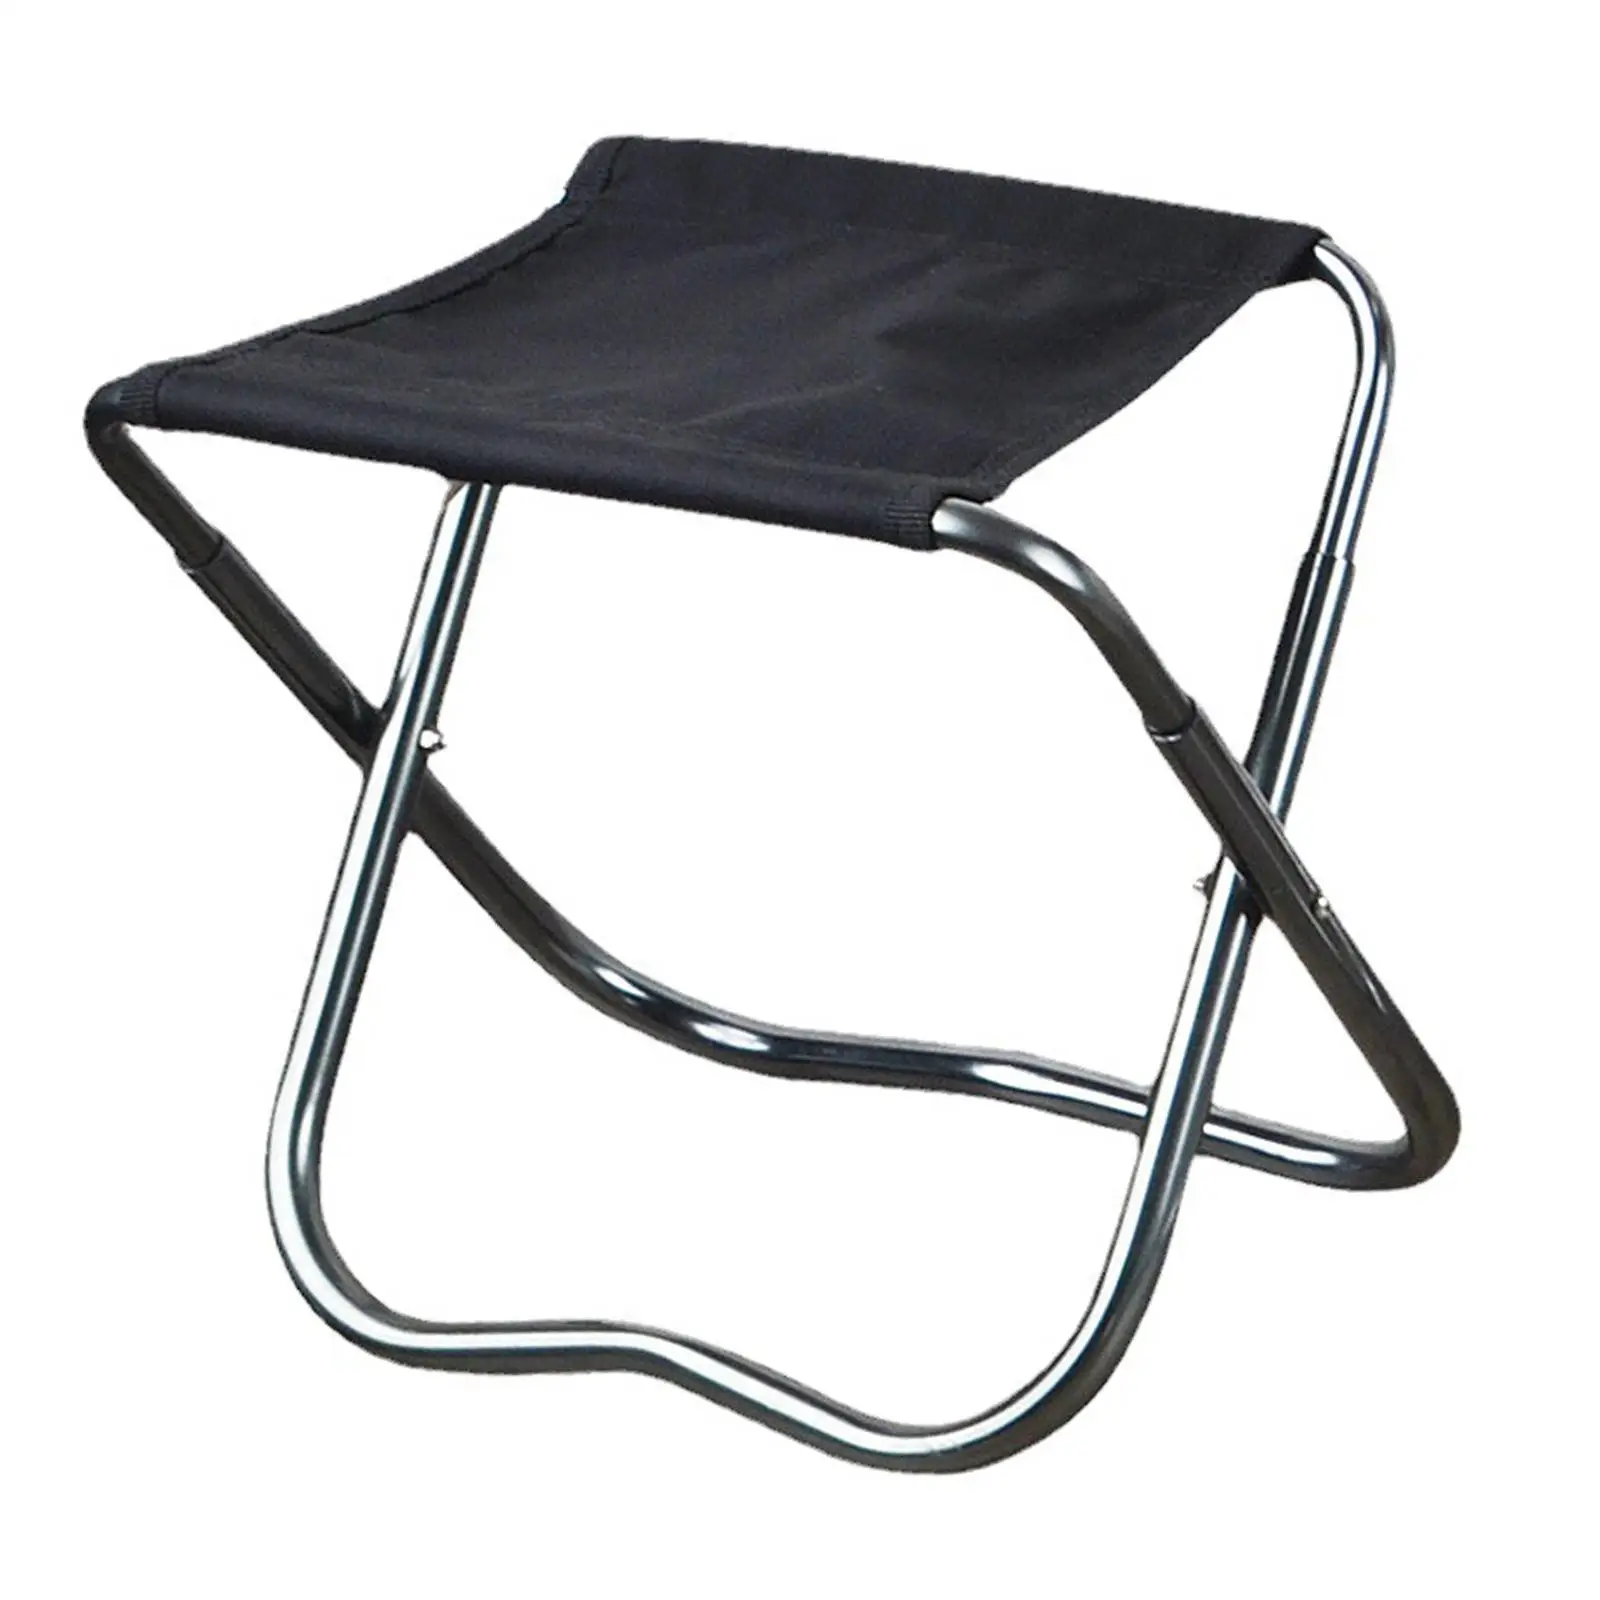 Camping Chair Easy to Carry Folding Stool Collapsible Comfortable Outdoor Fishing Seat for Hiking Camping Picnic Lawn